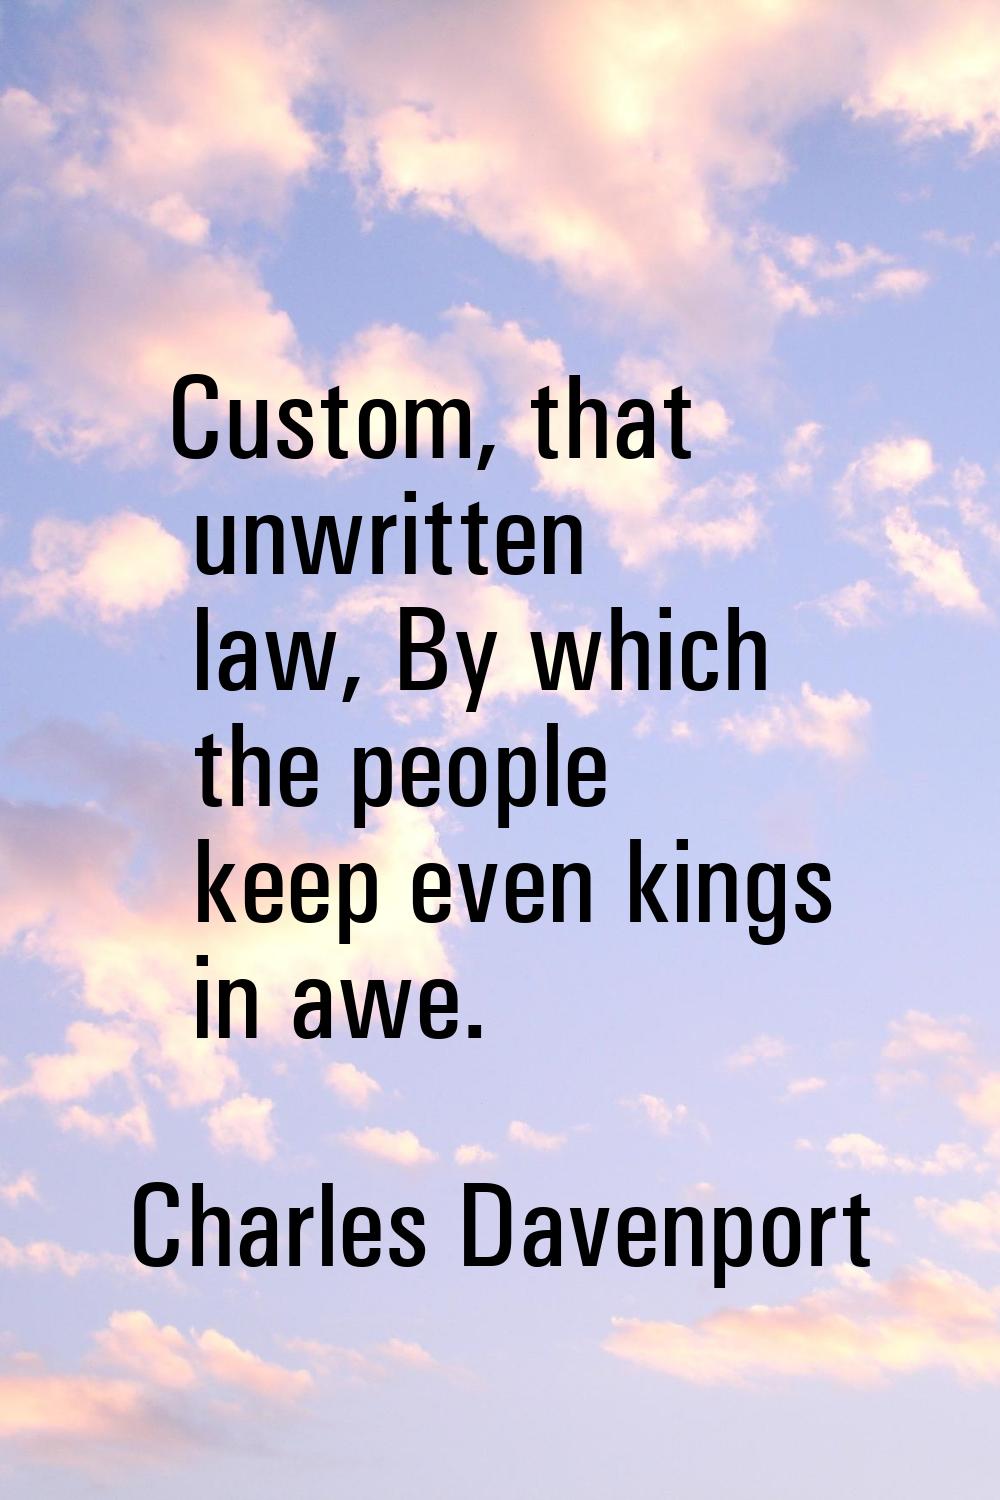 Custom, that unwritten law, By which the people keep even kings in awe.